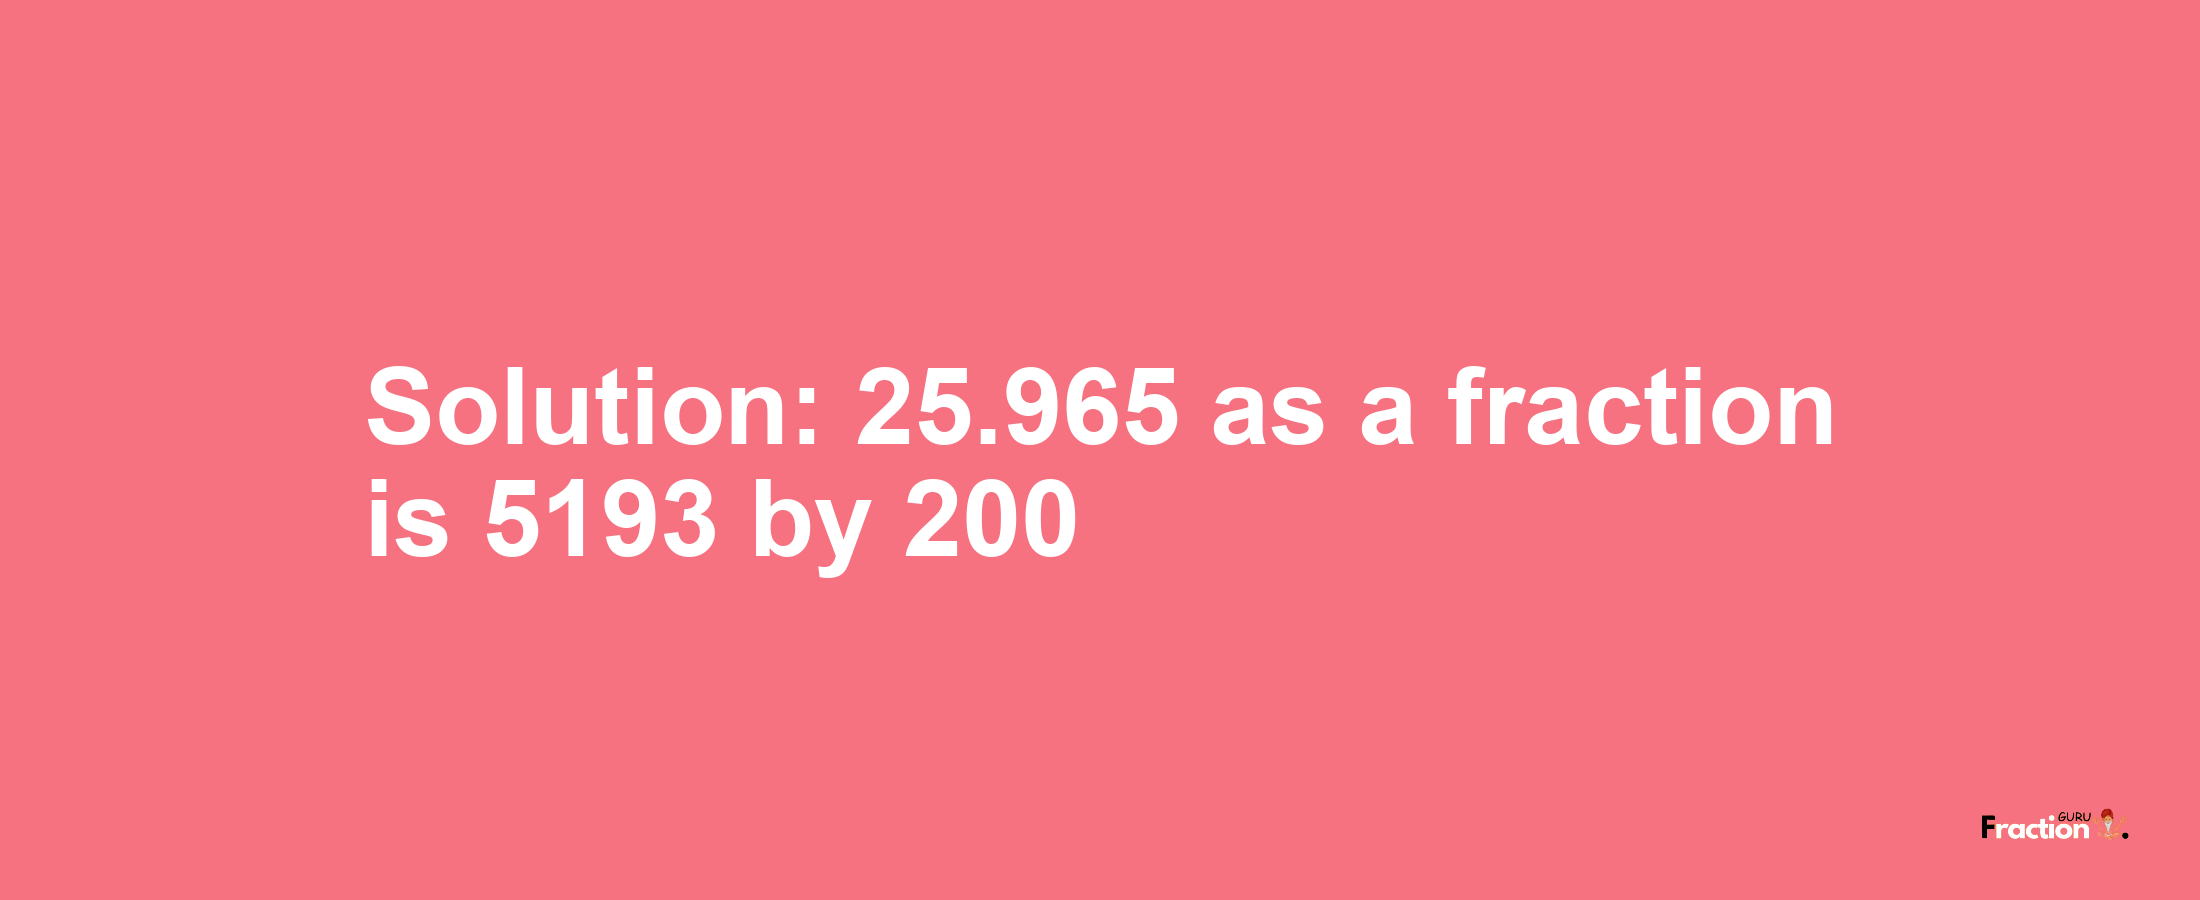 Solution:25.965 as a fraction is 5193/200